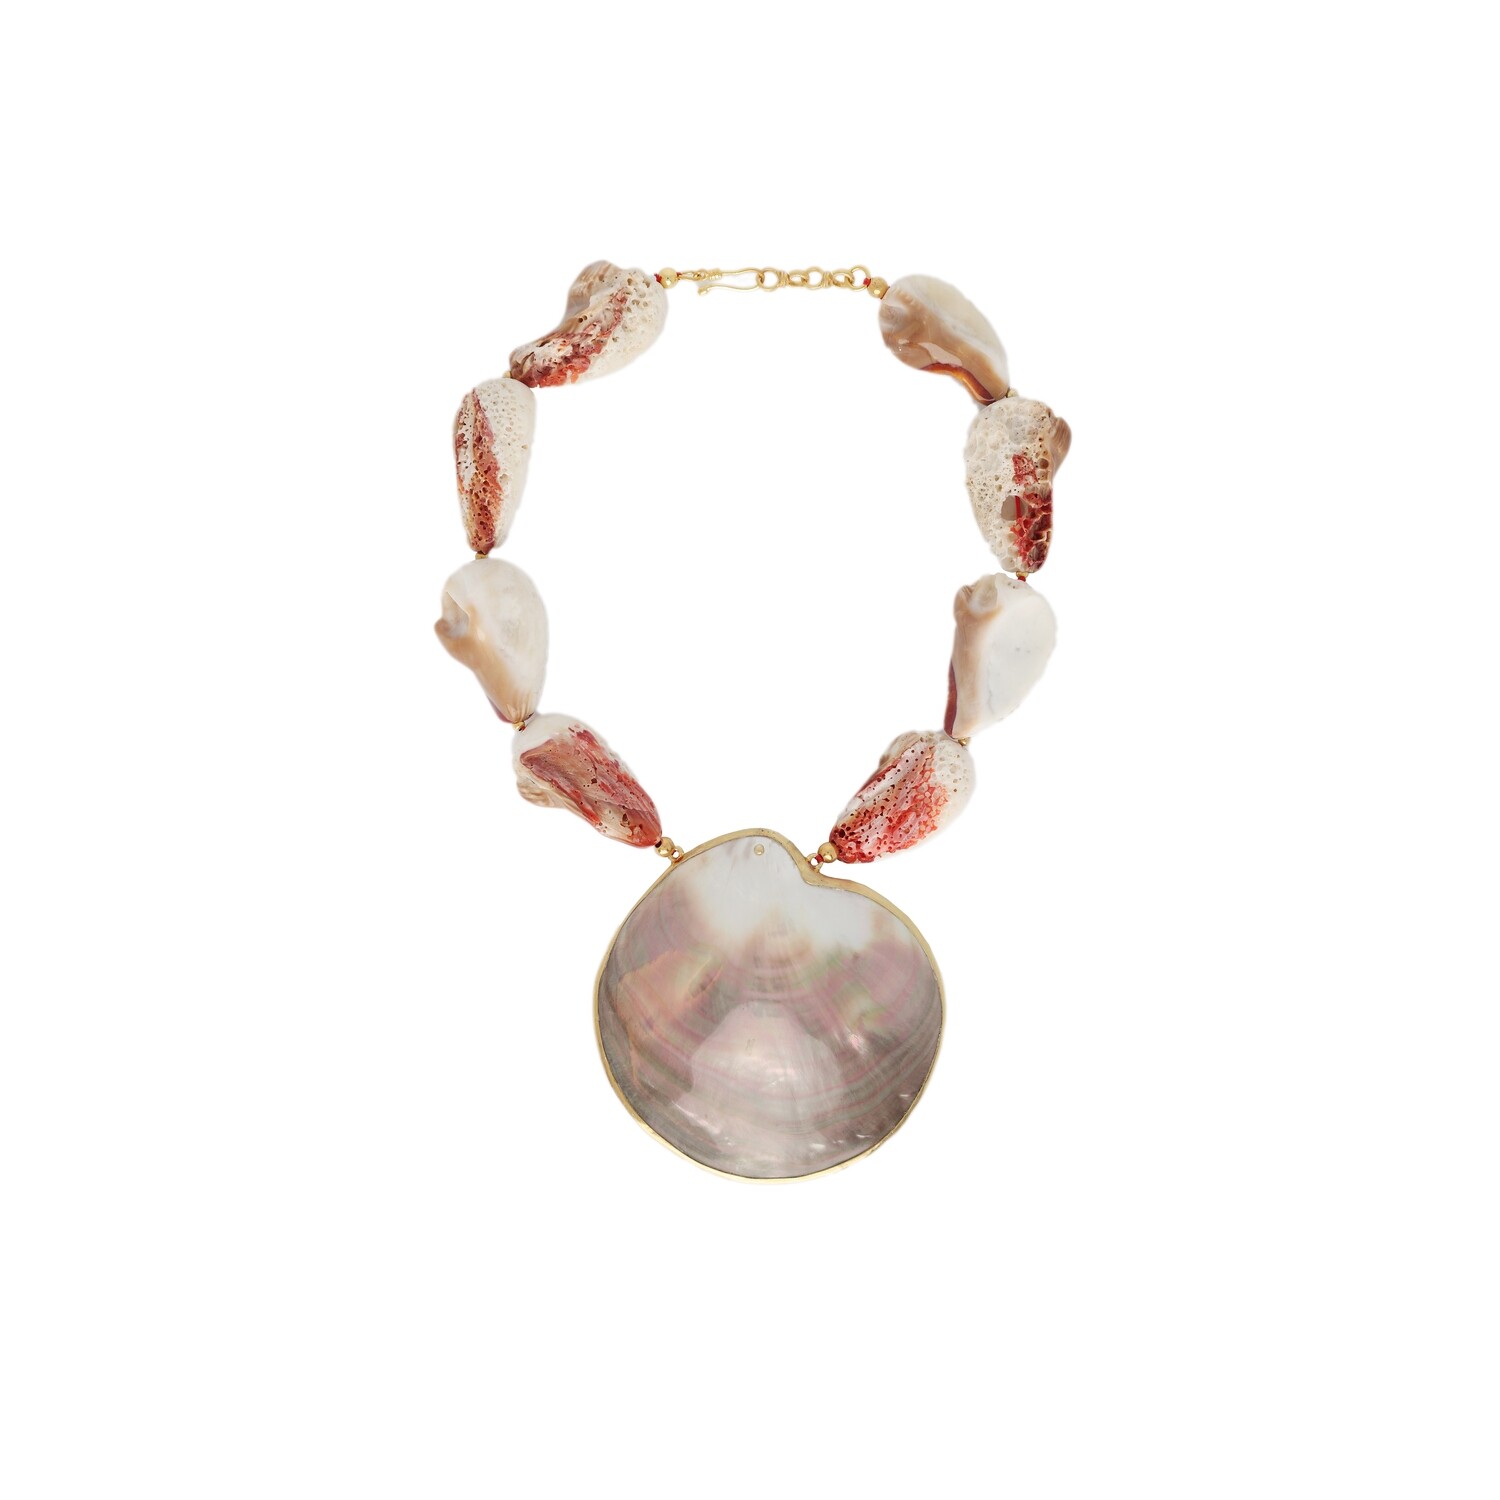 CAPRI in natural Seashell and Mother of Pearls